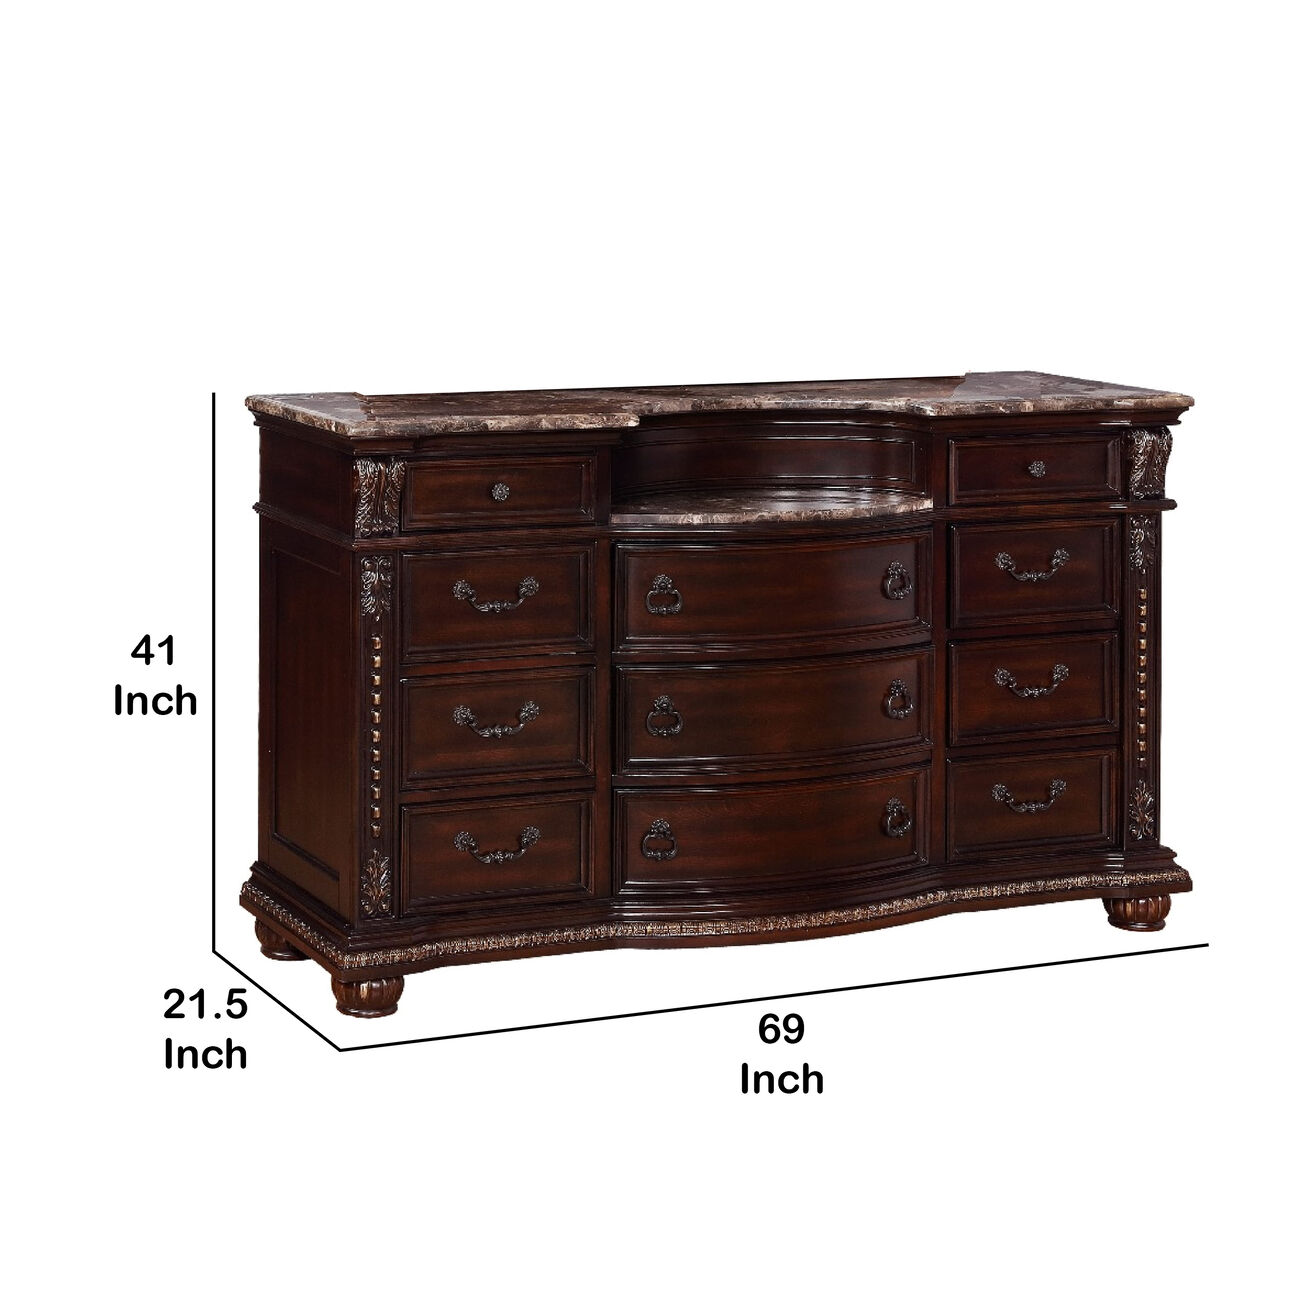 11 Drawers Wooden Dresser with Engraved Details and Bun Feet, Cherry Brown